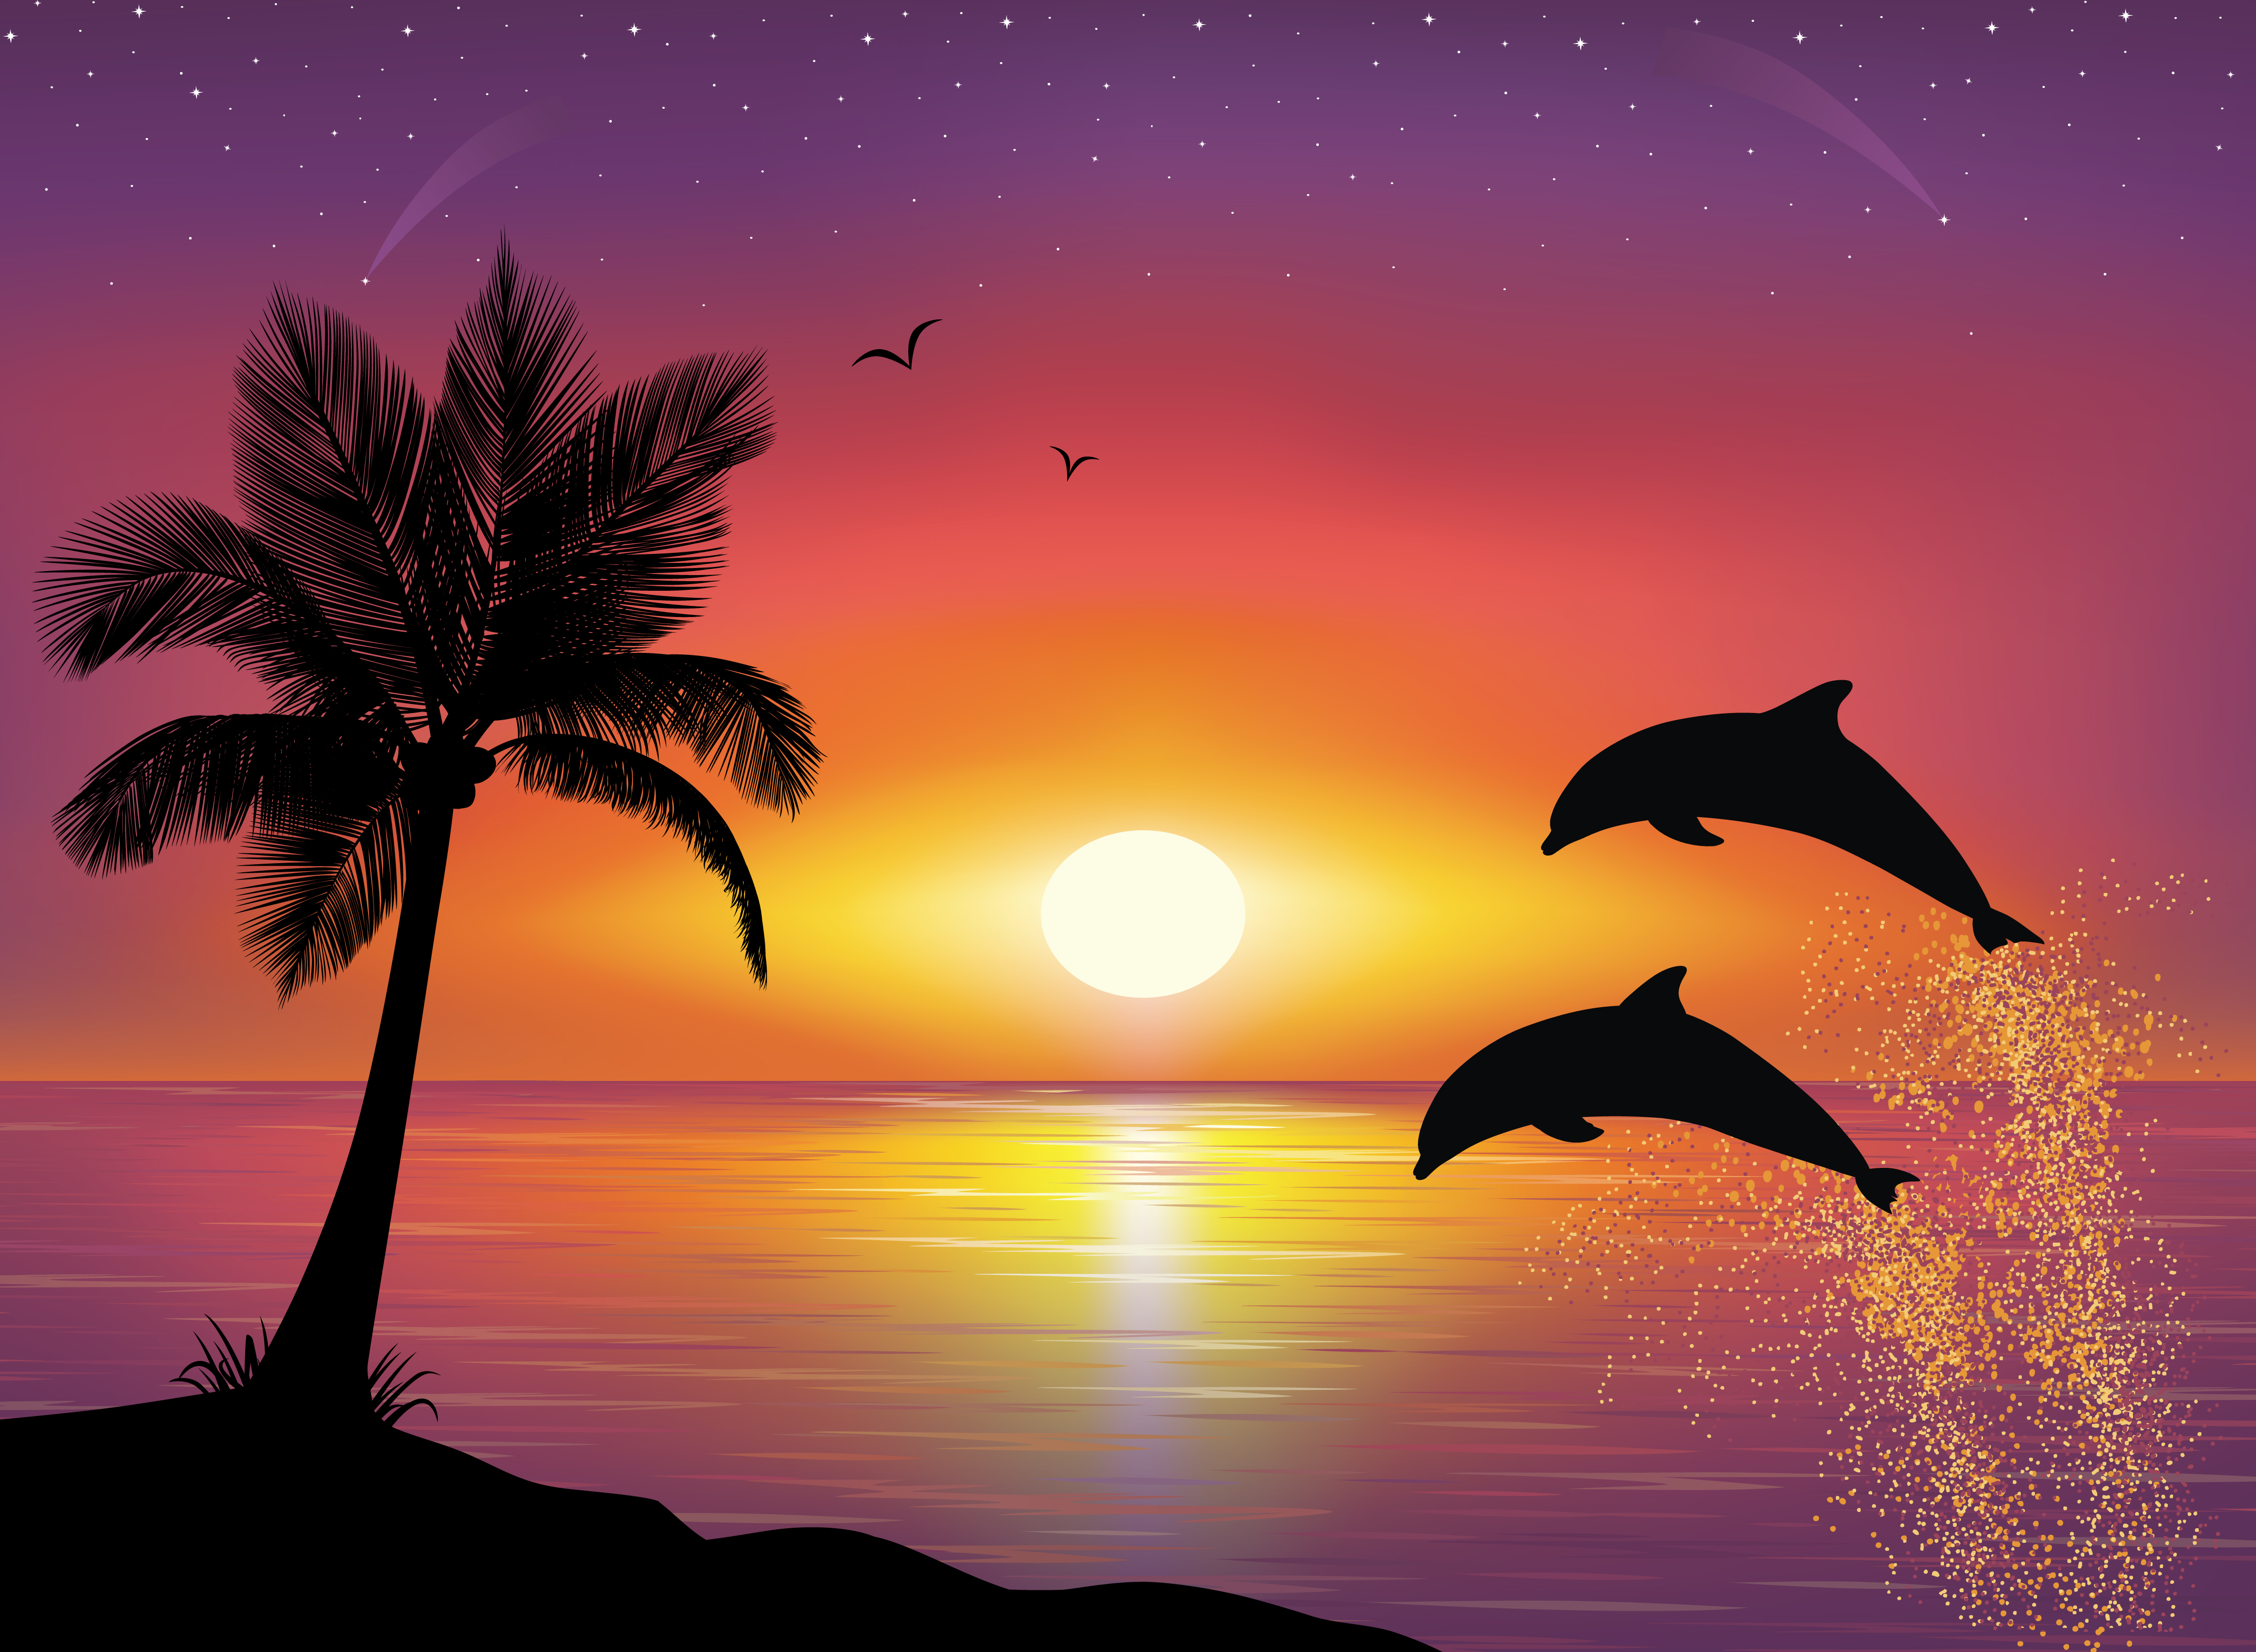 Seascapes and the dolphins - Vector clipart » Векторные клипарты ...